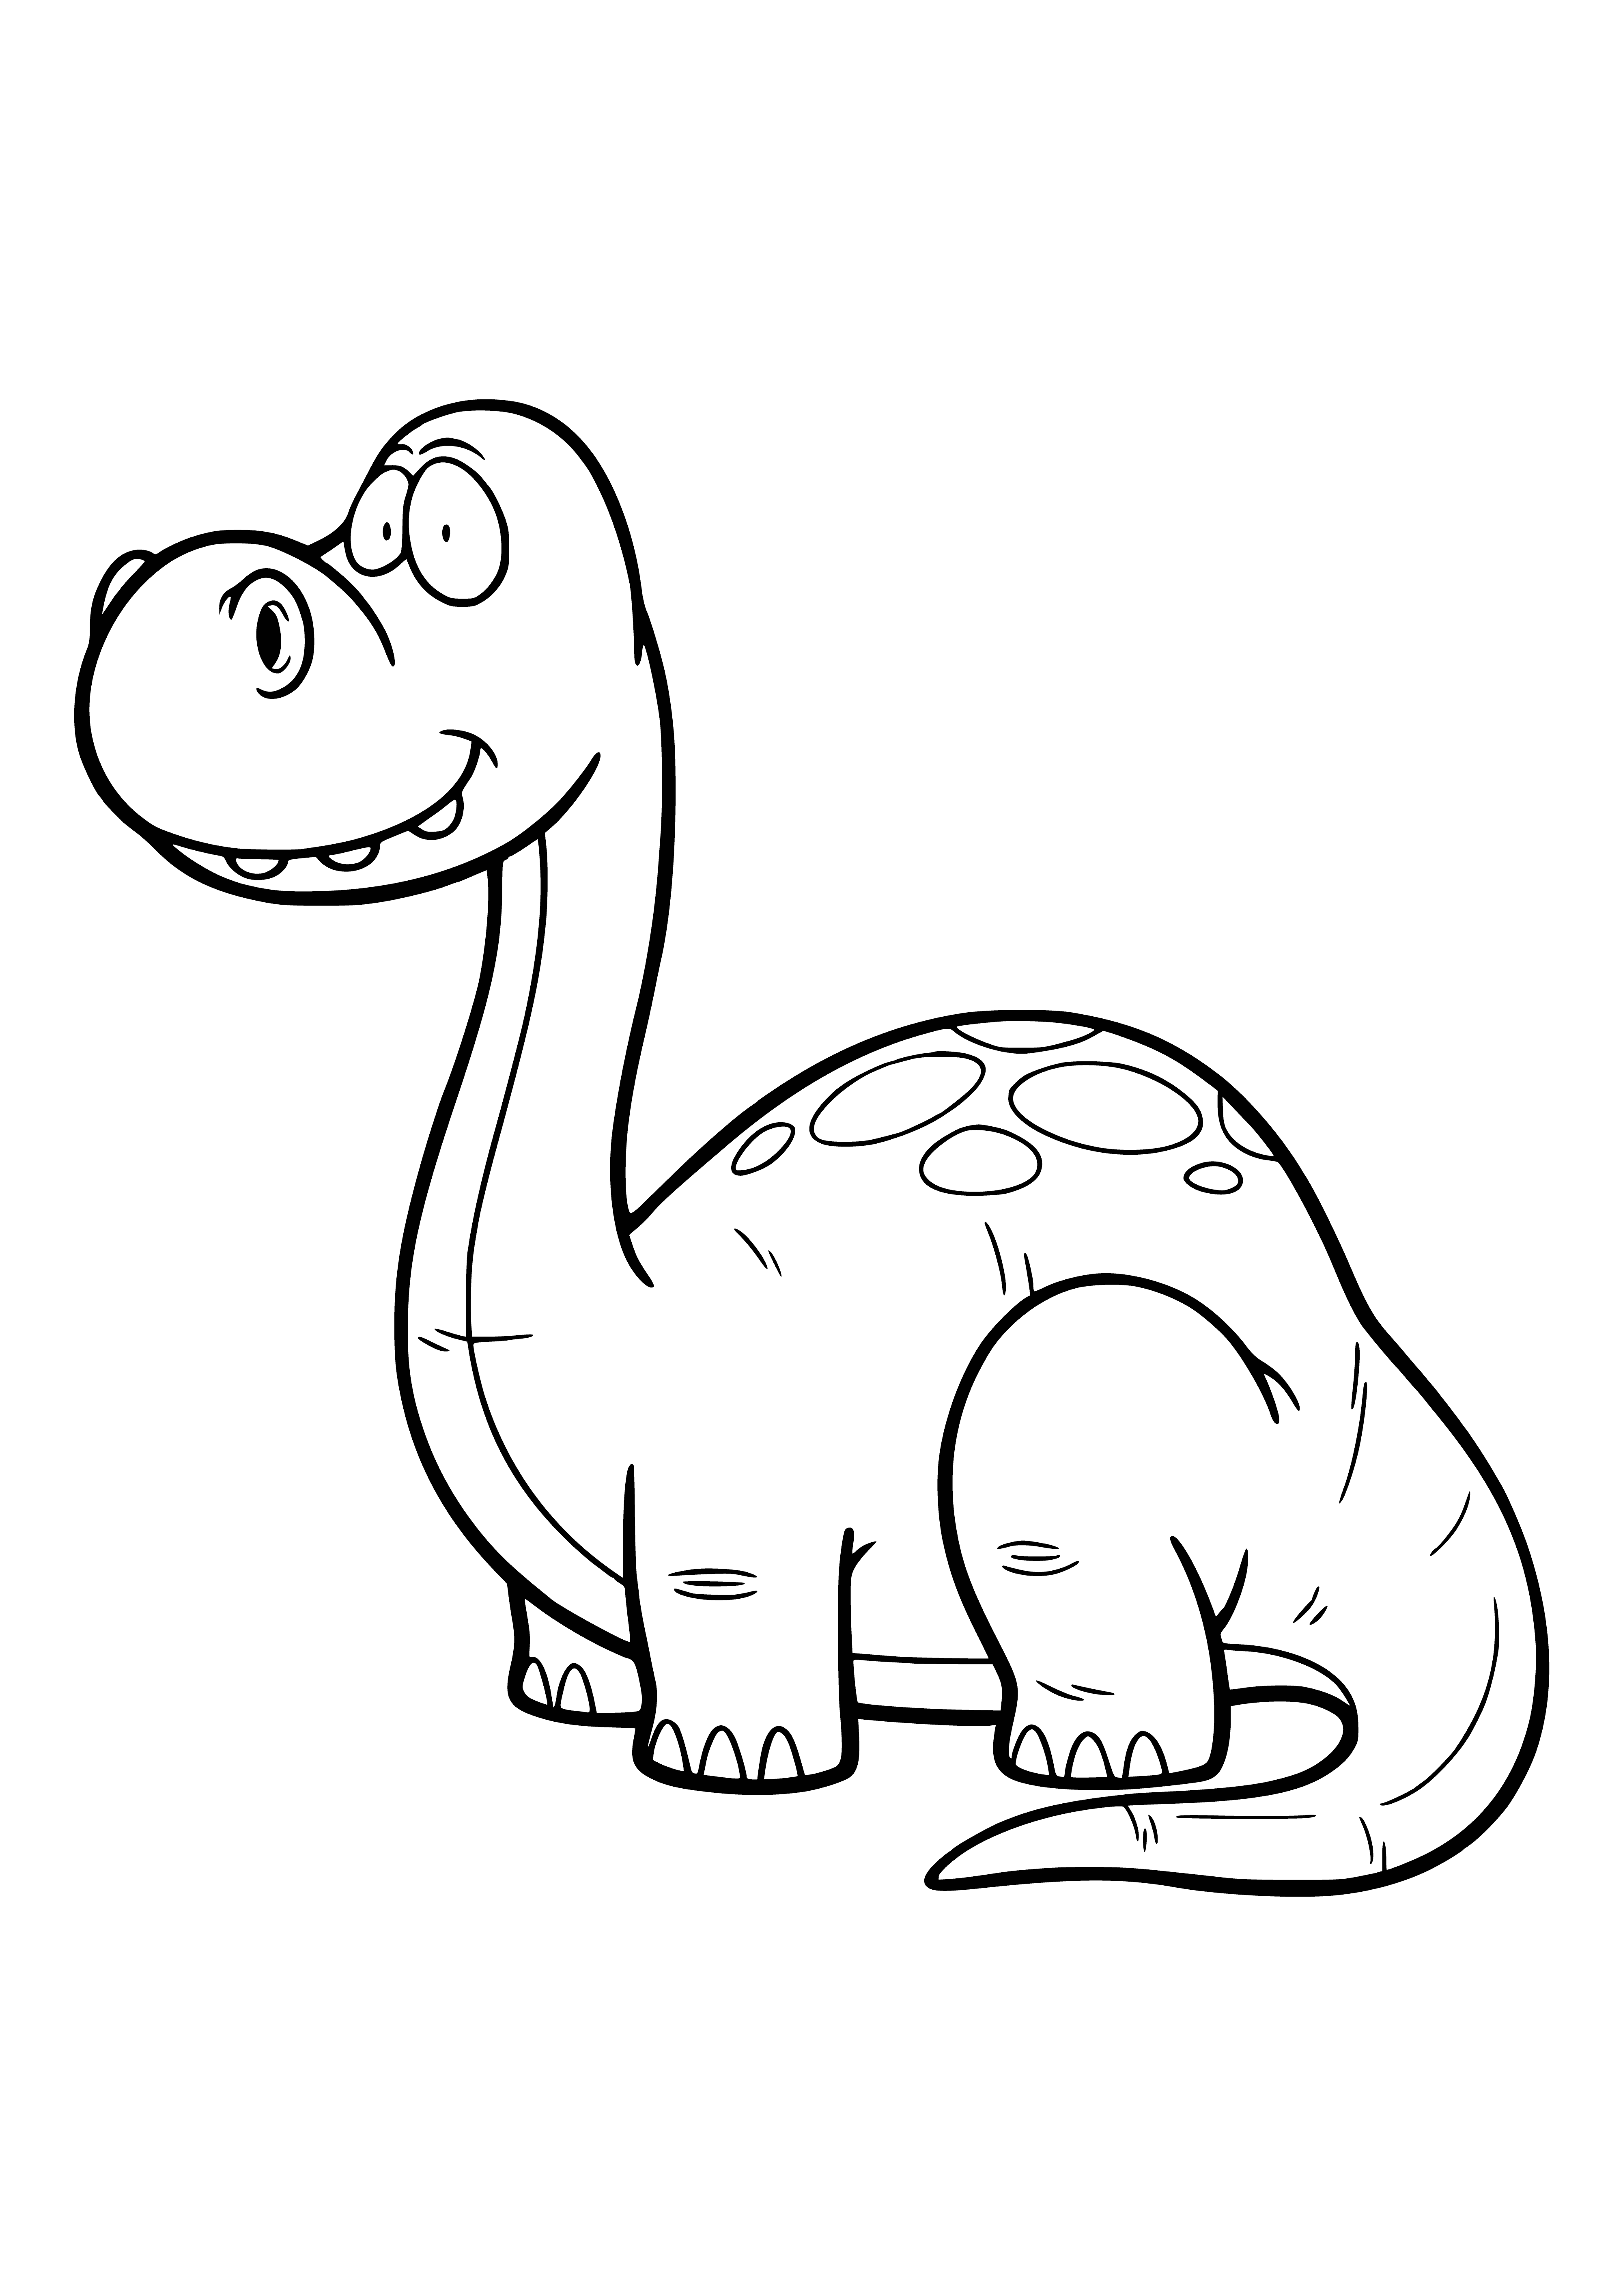 coloring page: Coloring page of Apatosaurus--large dino w/ long neck & tail, small arms, big feet, green w/ yellow spots.